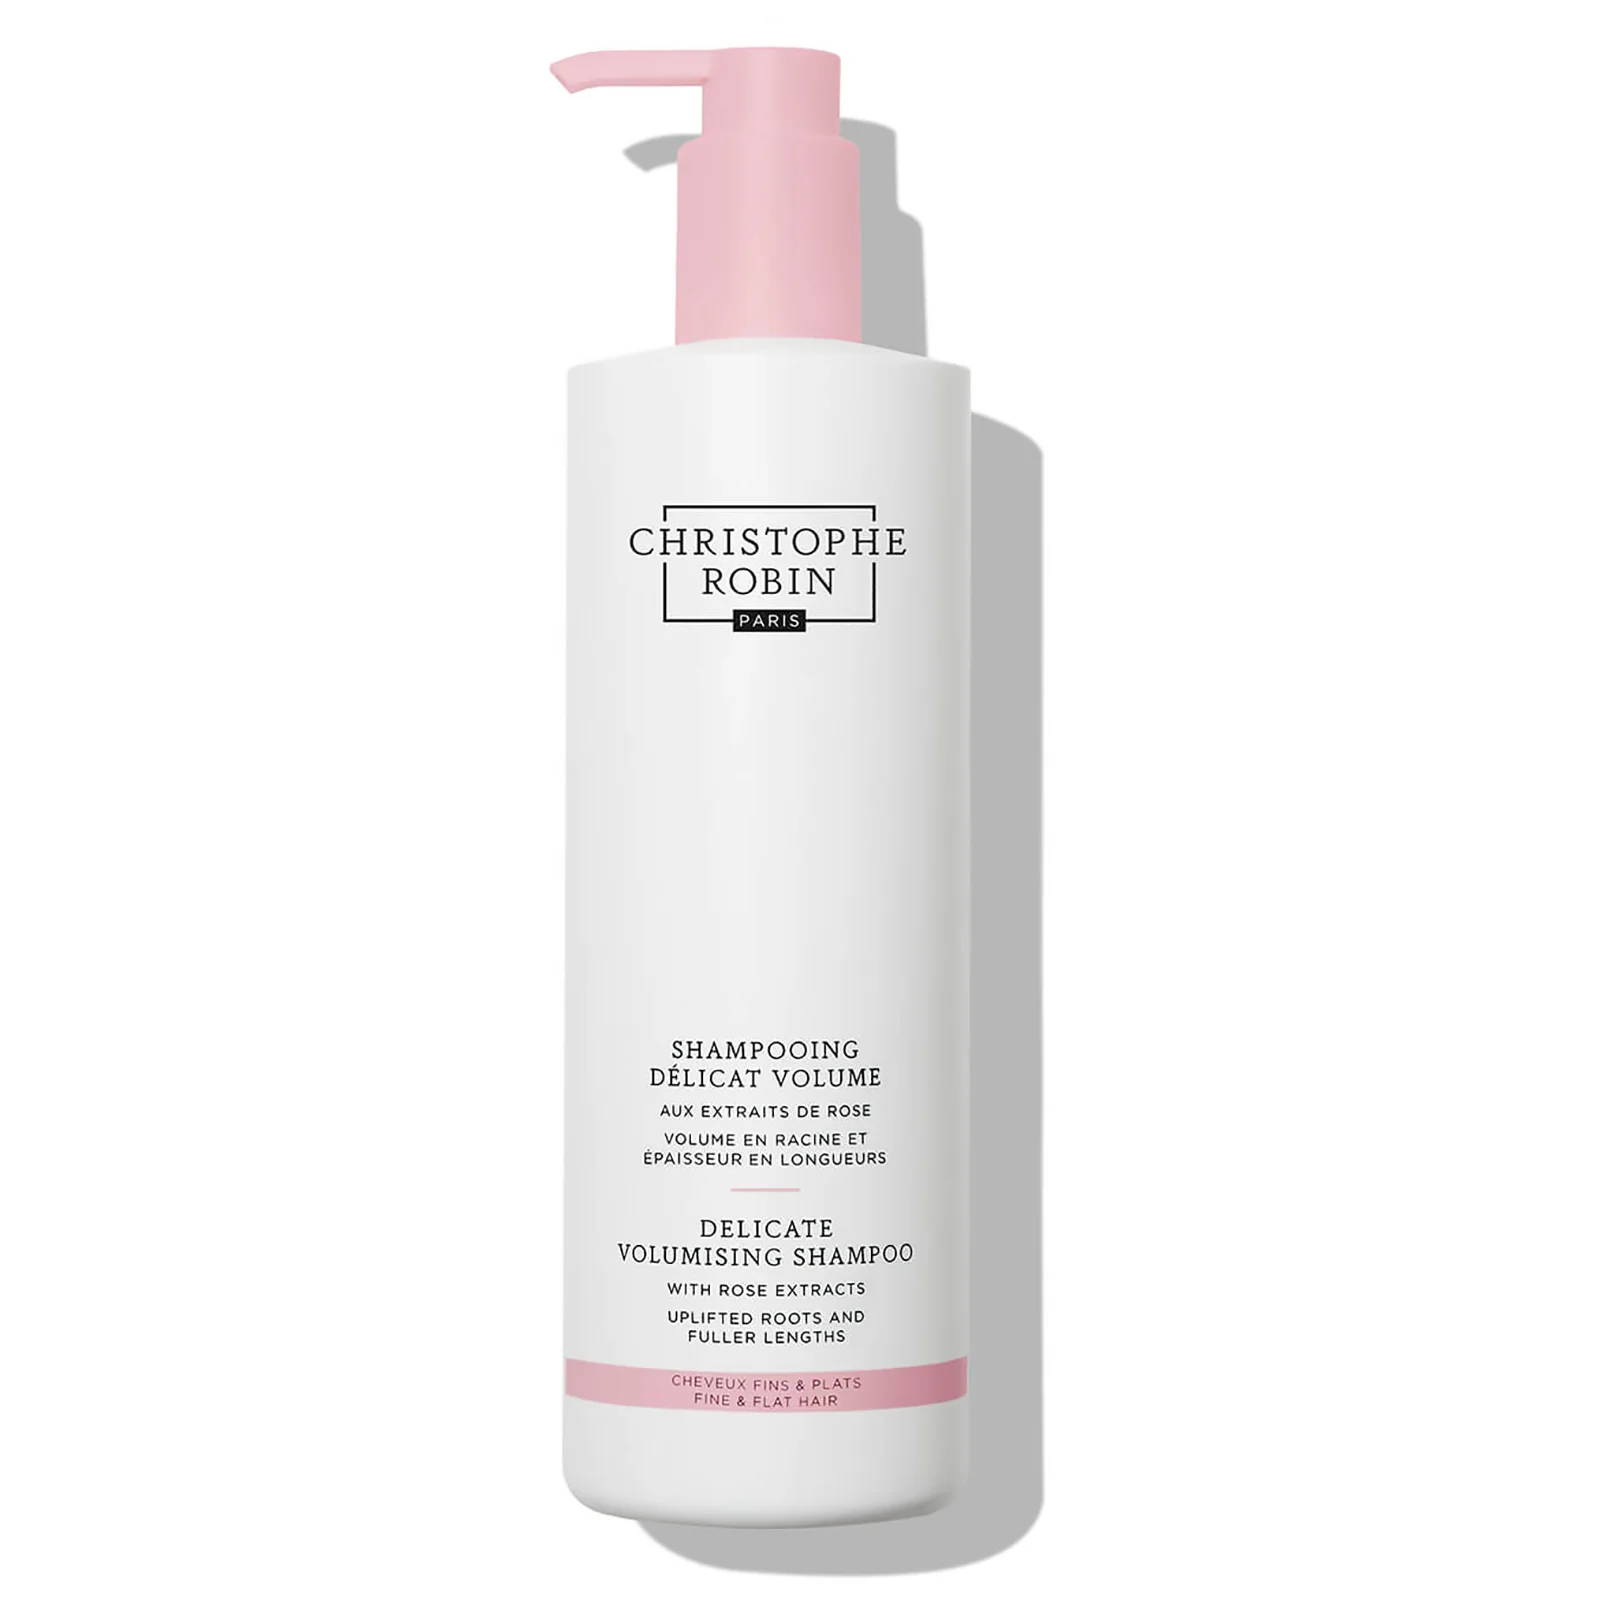 Christophe Robin Delicate Volumising Shampoo with Rose Extracts 500ml Image 1